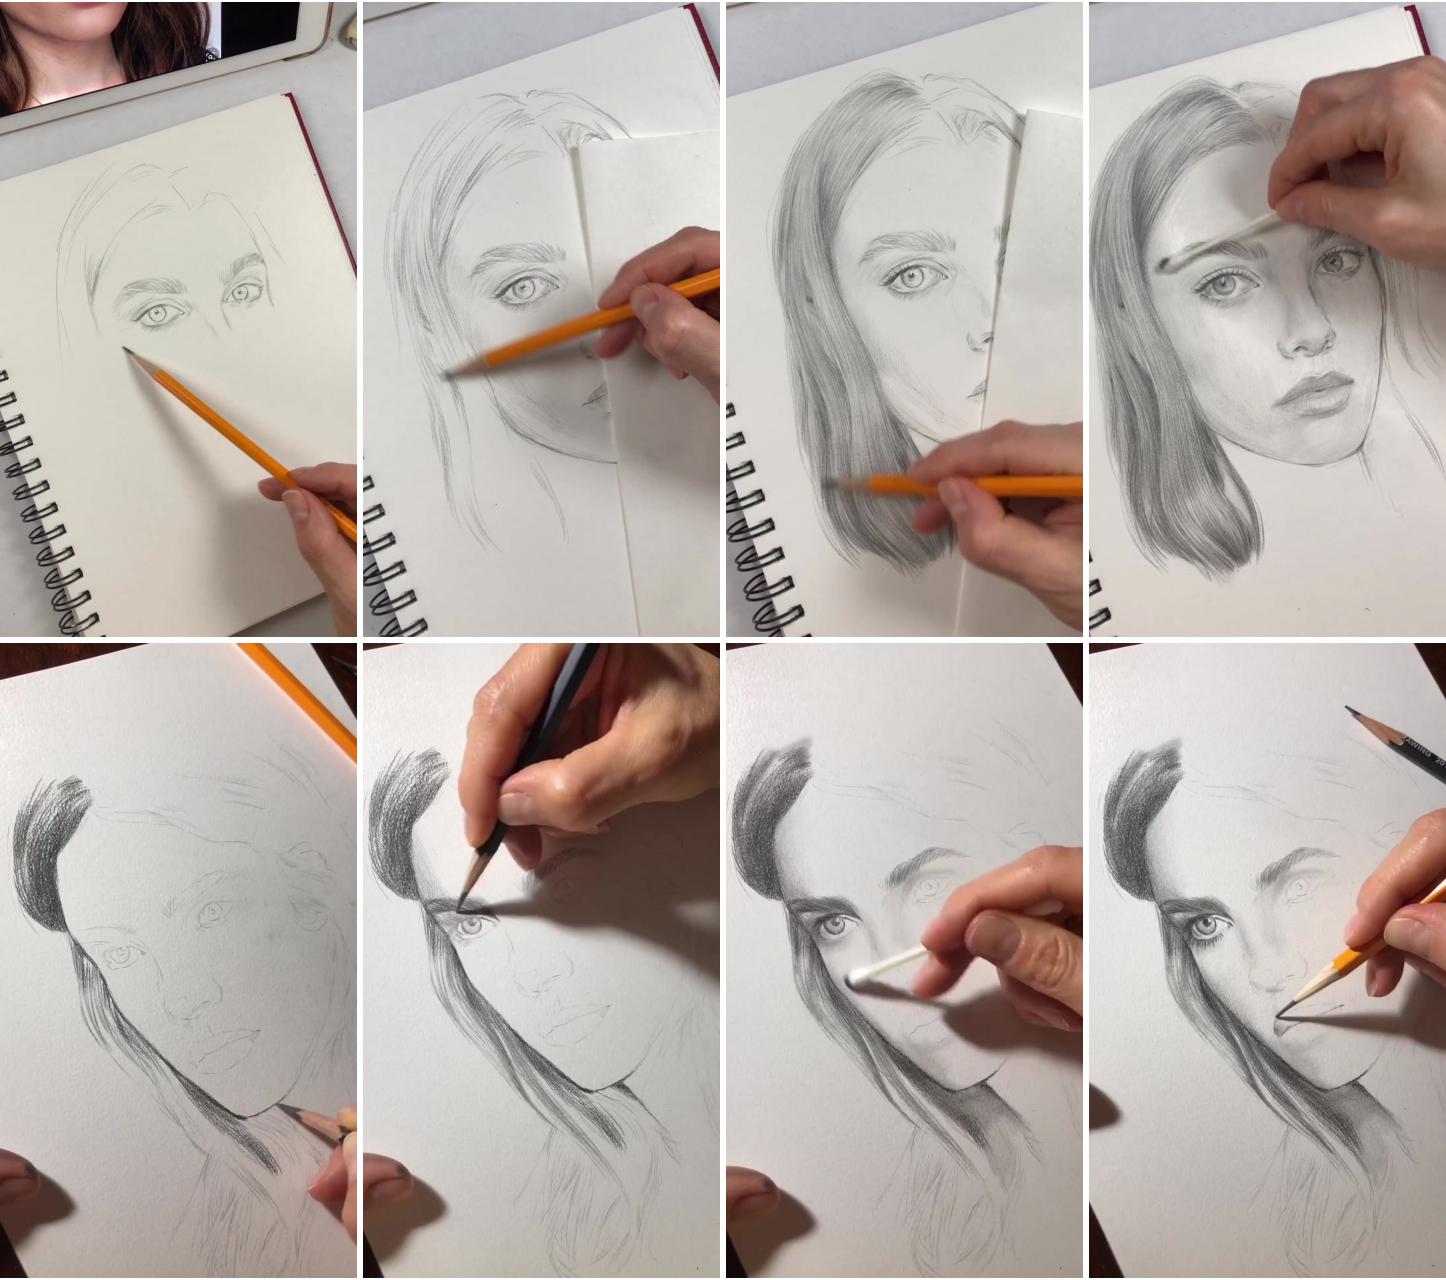 Drawing a pencil portrait. pencil sketching by nadia coolrista | portrait of natalia vodianova